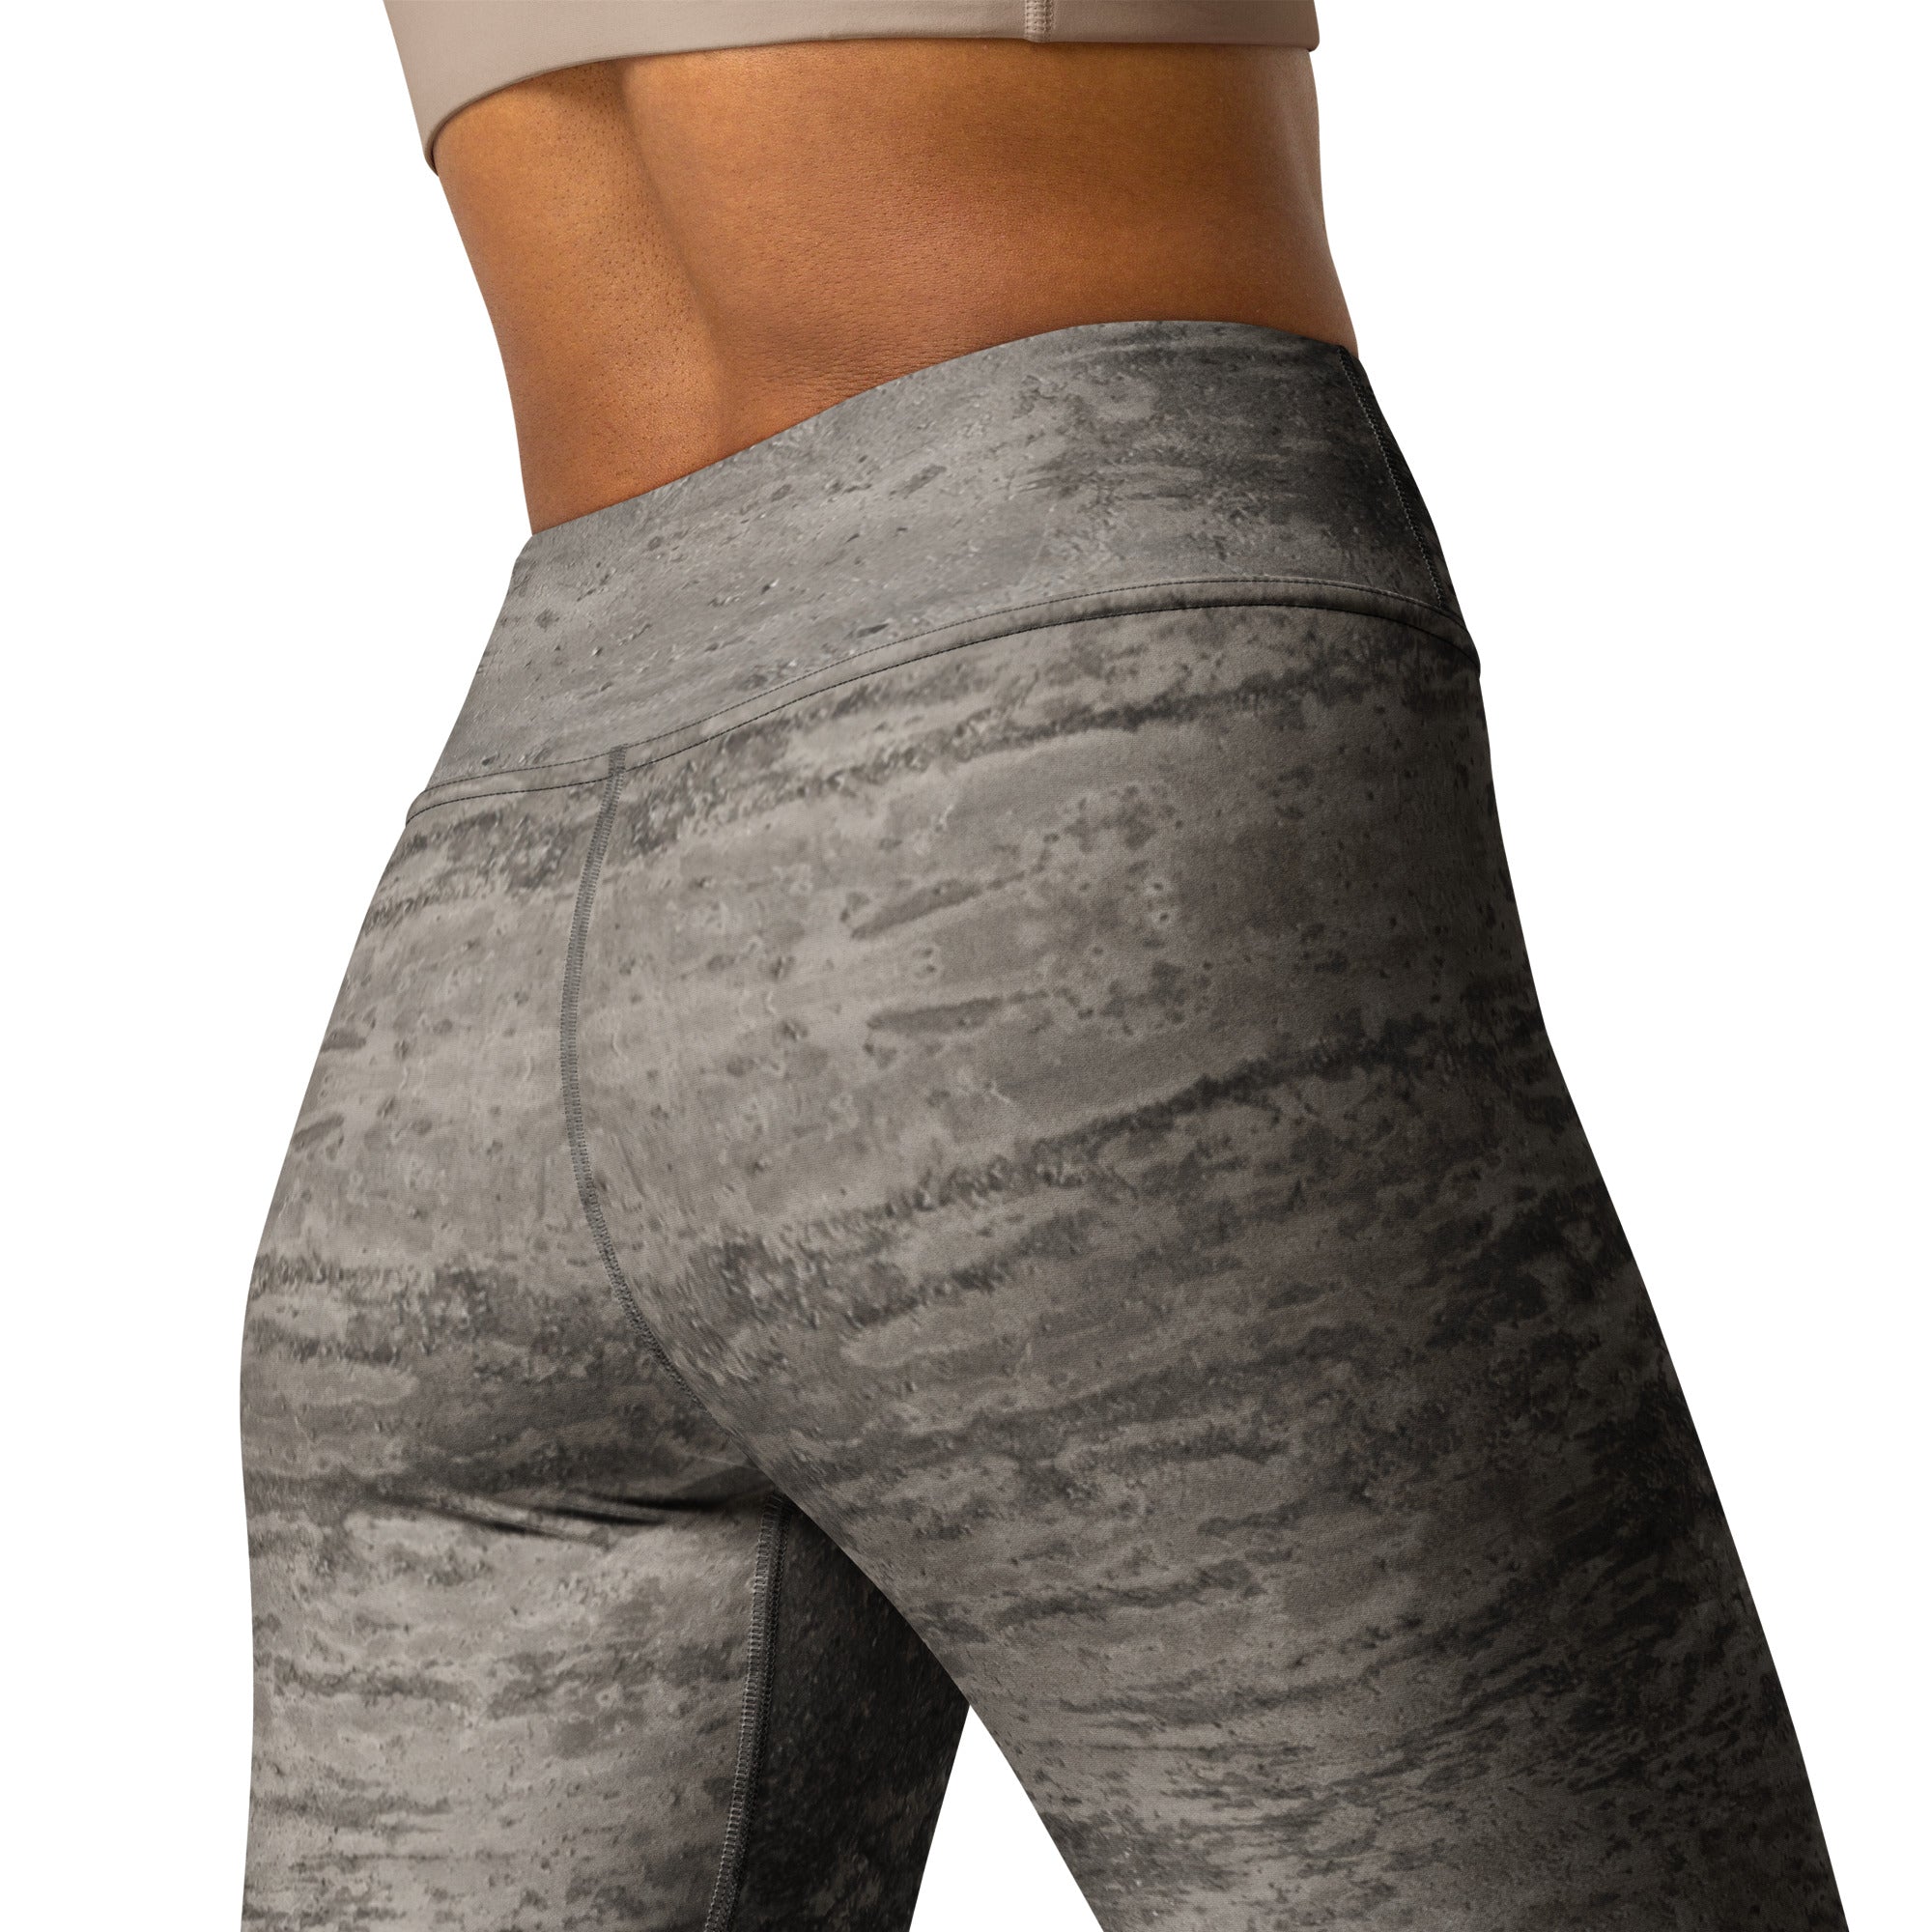 Close-Up of Suede Embrace Yoga Leggings with High Waist Design